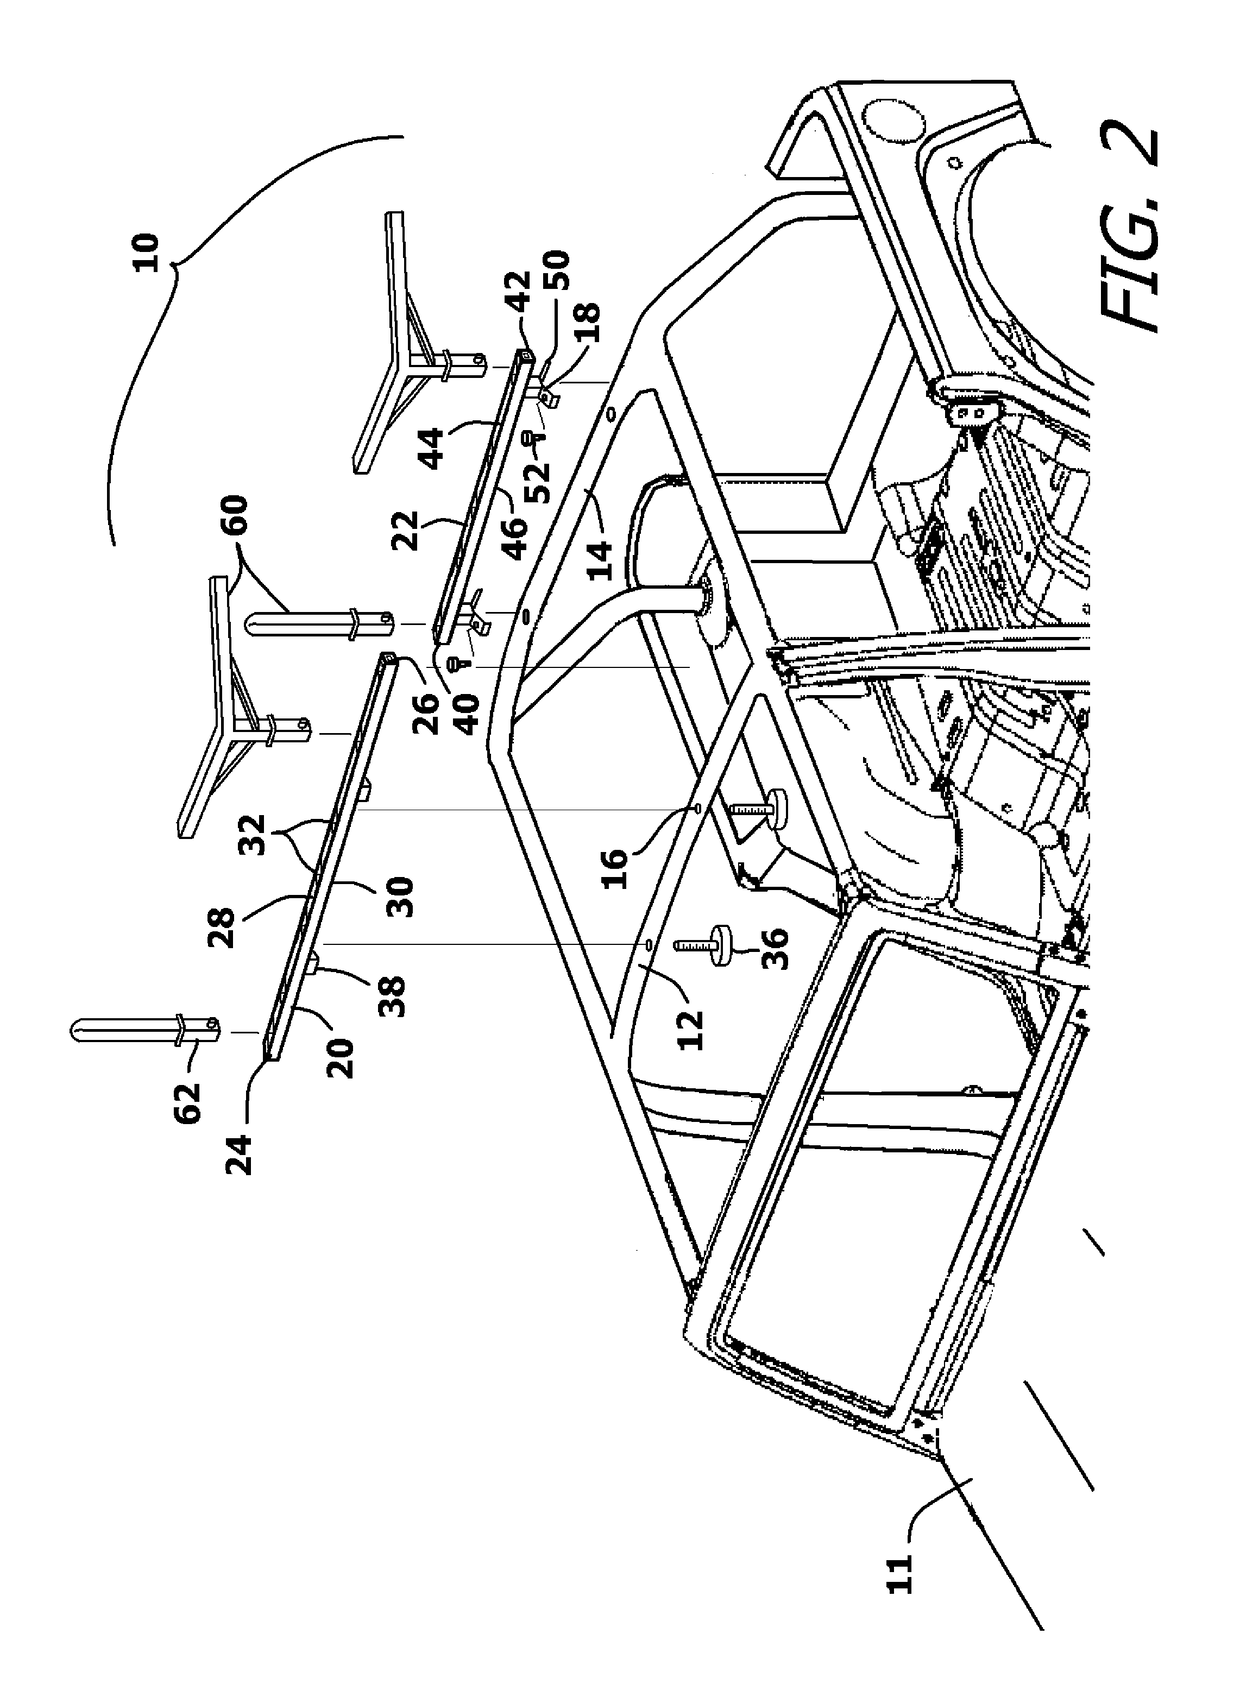 Roof Rack System for a Vehicle and Its Associated Method of Installation